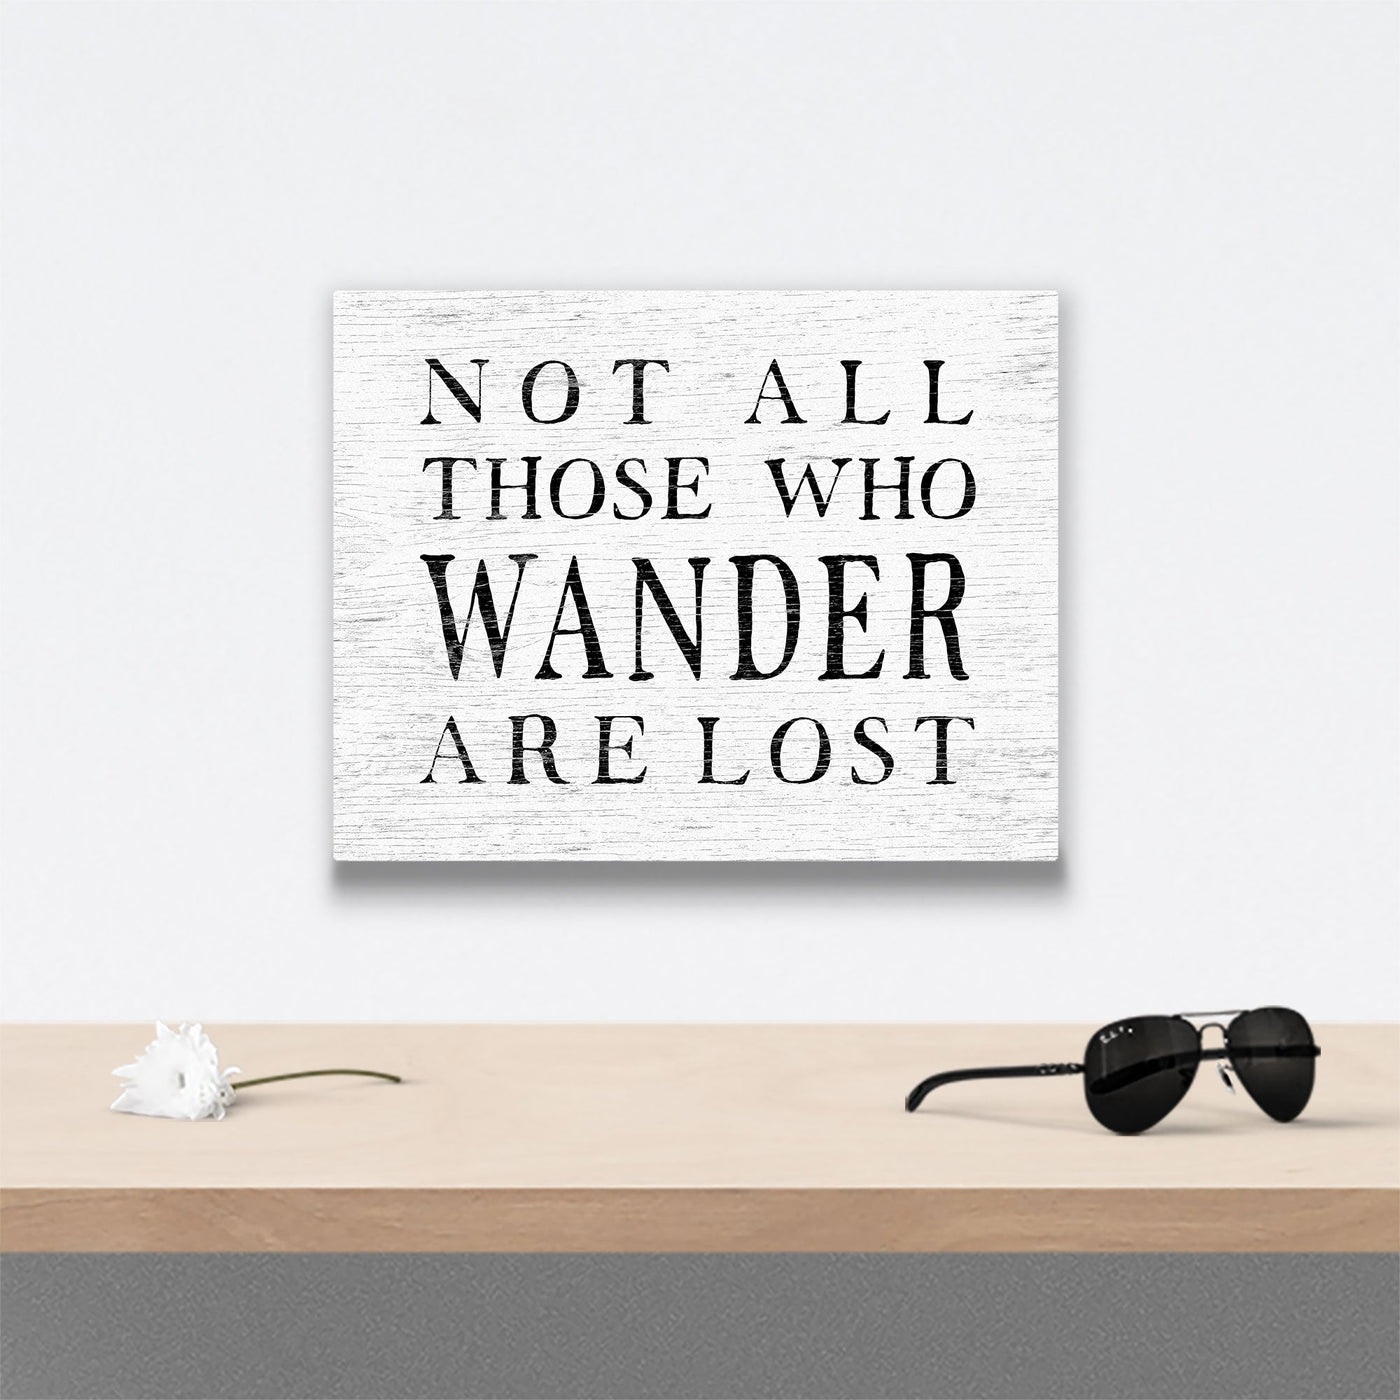 Not All Those Who Wander Are Lost - Canvas Wall Art